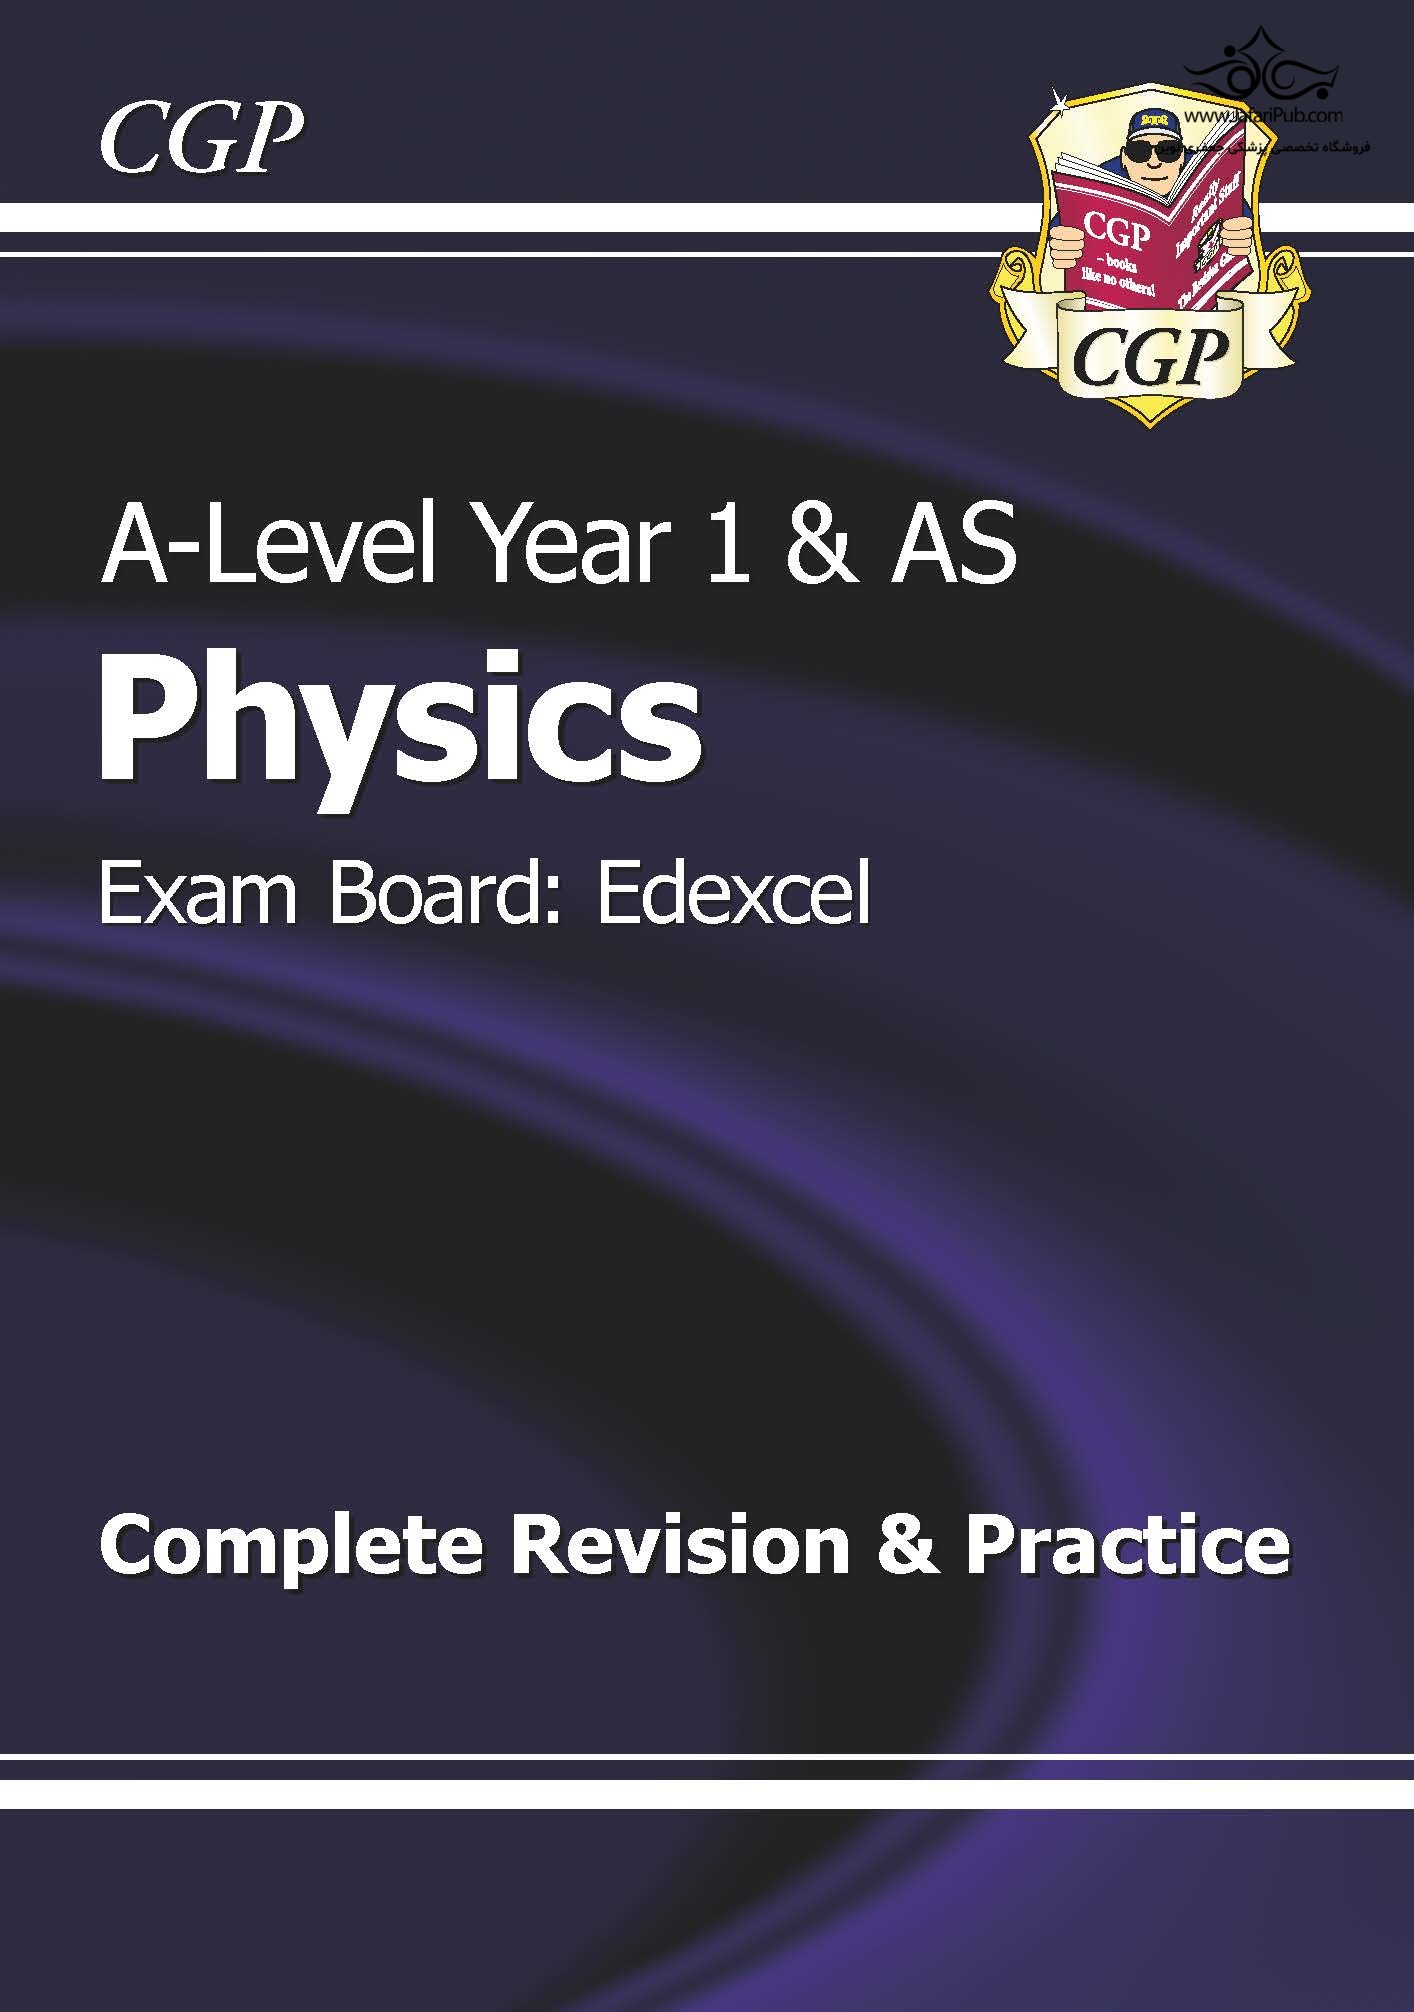 A-Level Physics: Edexcel Year 1 & AS Complete Revision & Practice: ideal for catch-up and the exams in 2022 and 2023 (CGP A-Level Physics) Wolters Kluwer